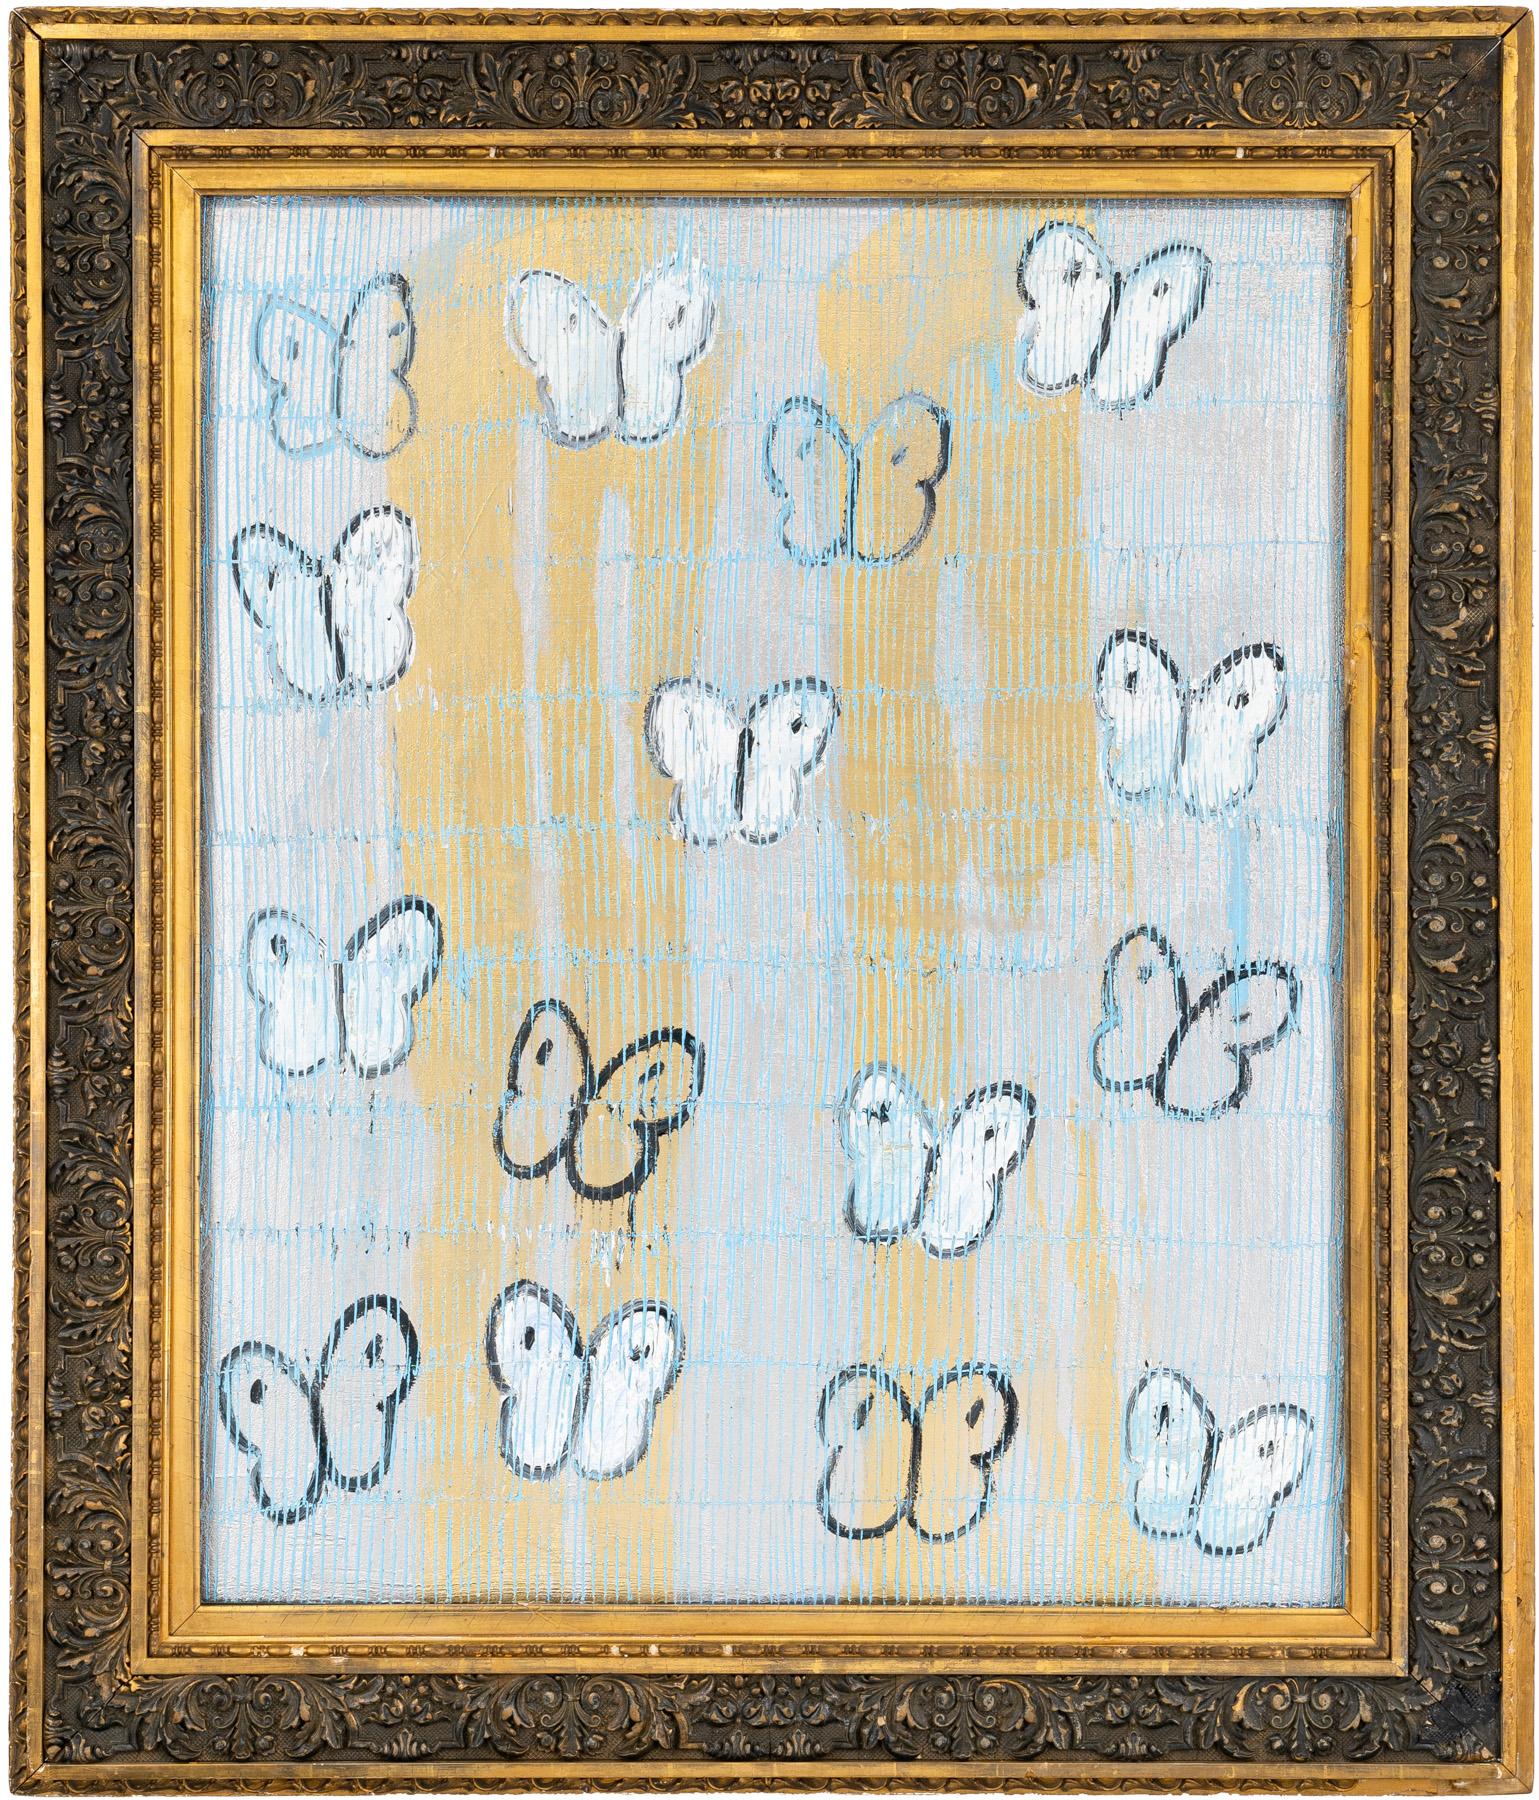 Hunt Slonem "Flutter Ascension in Blue" Butterflies
Black outlined white and light blue butterflies on a gold and silver etched background in an antique frame.

Unframed: 39.5 x 32.5 inches
Framed: 49 x 42 inches
*Painting is framed - Please note